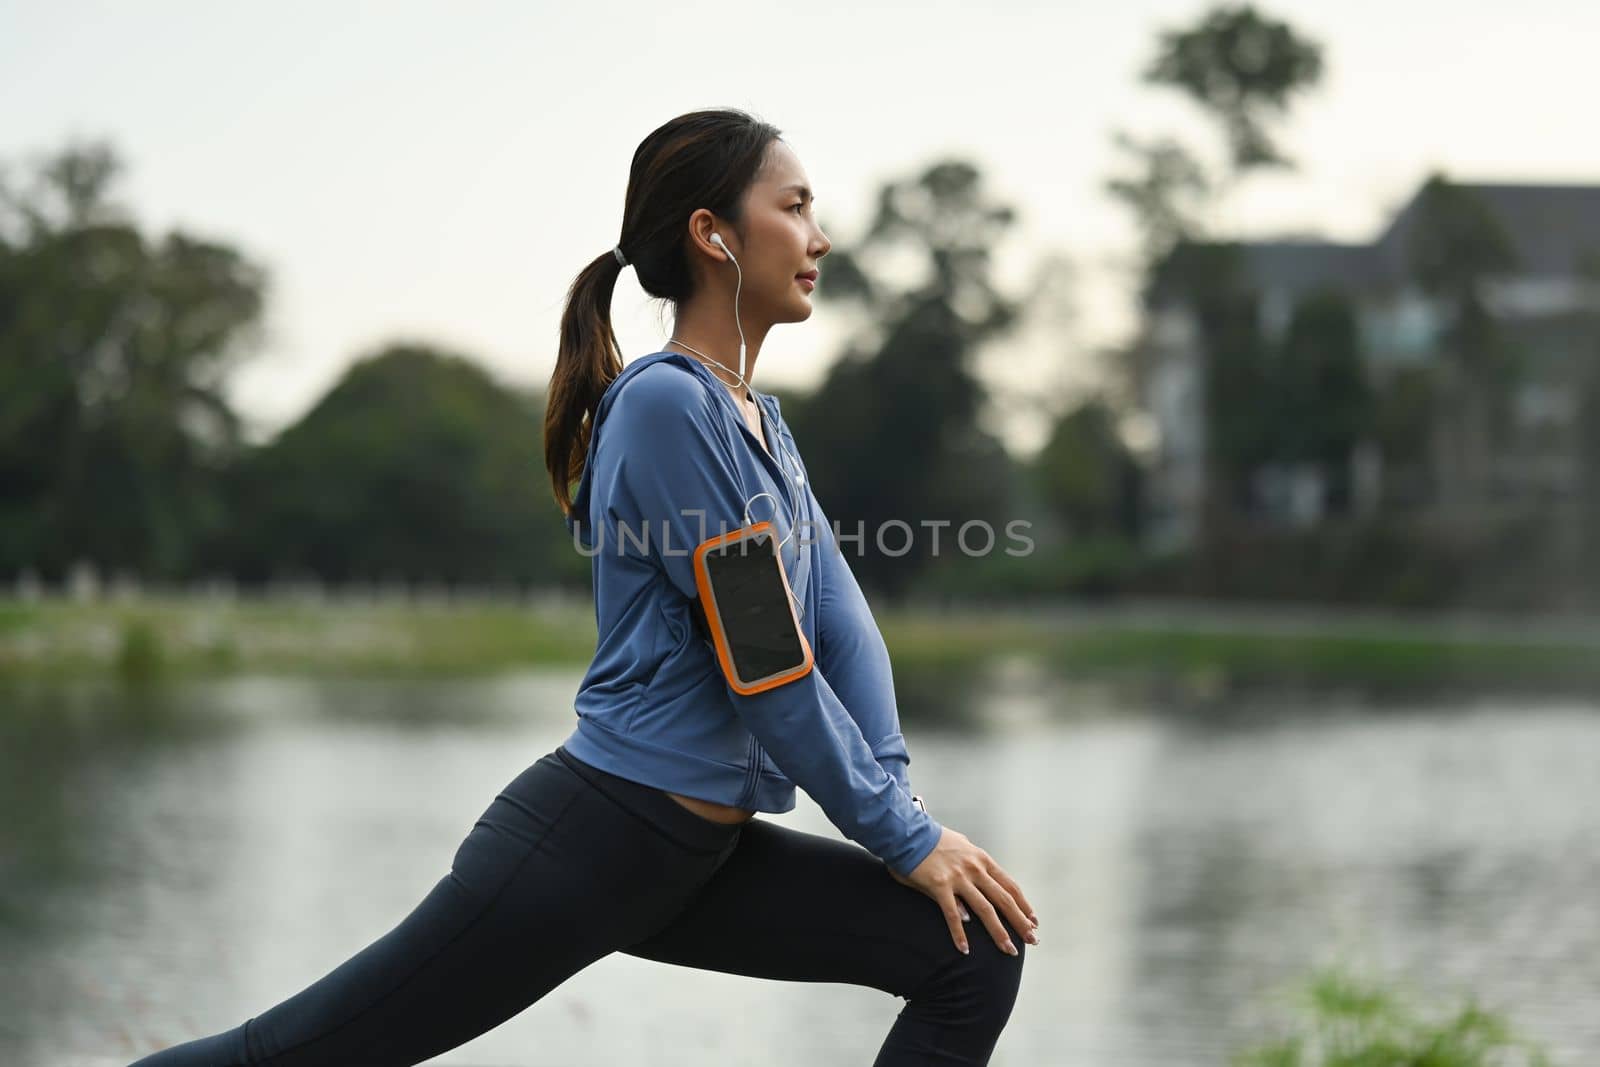 Sporty woman warming up, stretching her legs before morning workout. Fitness, sport and healthy lifestyle concept.